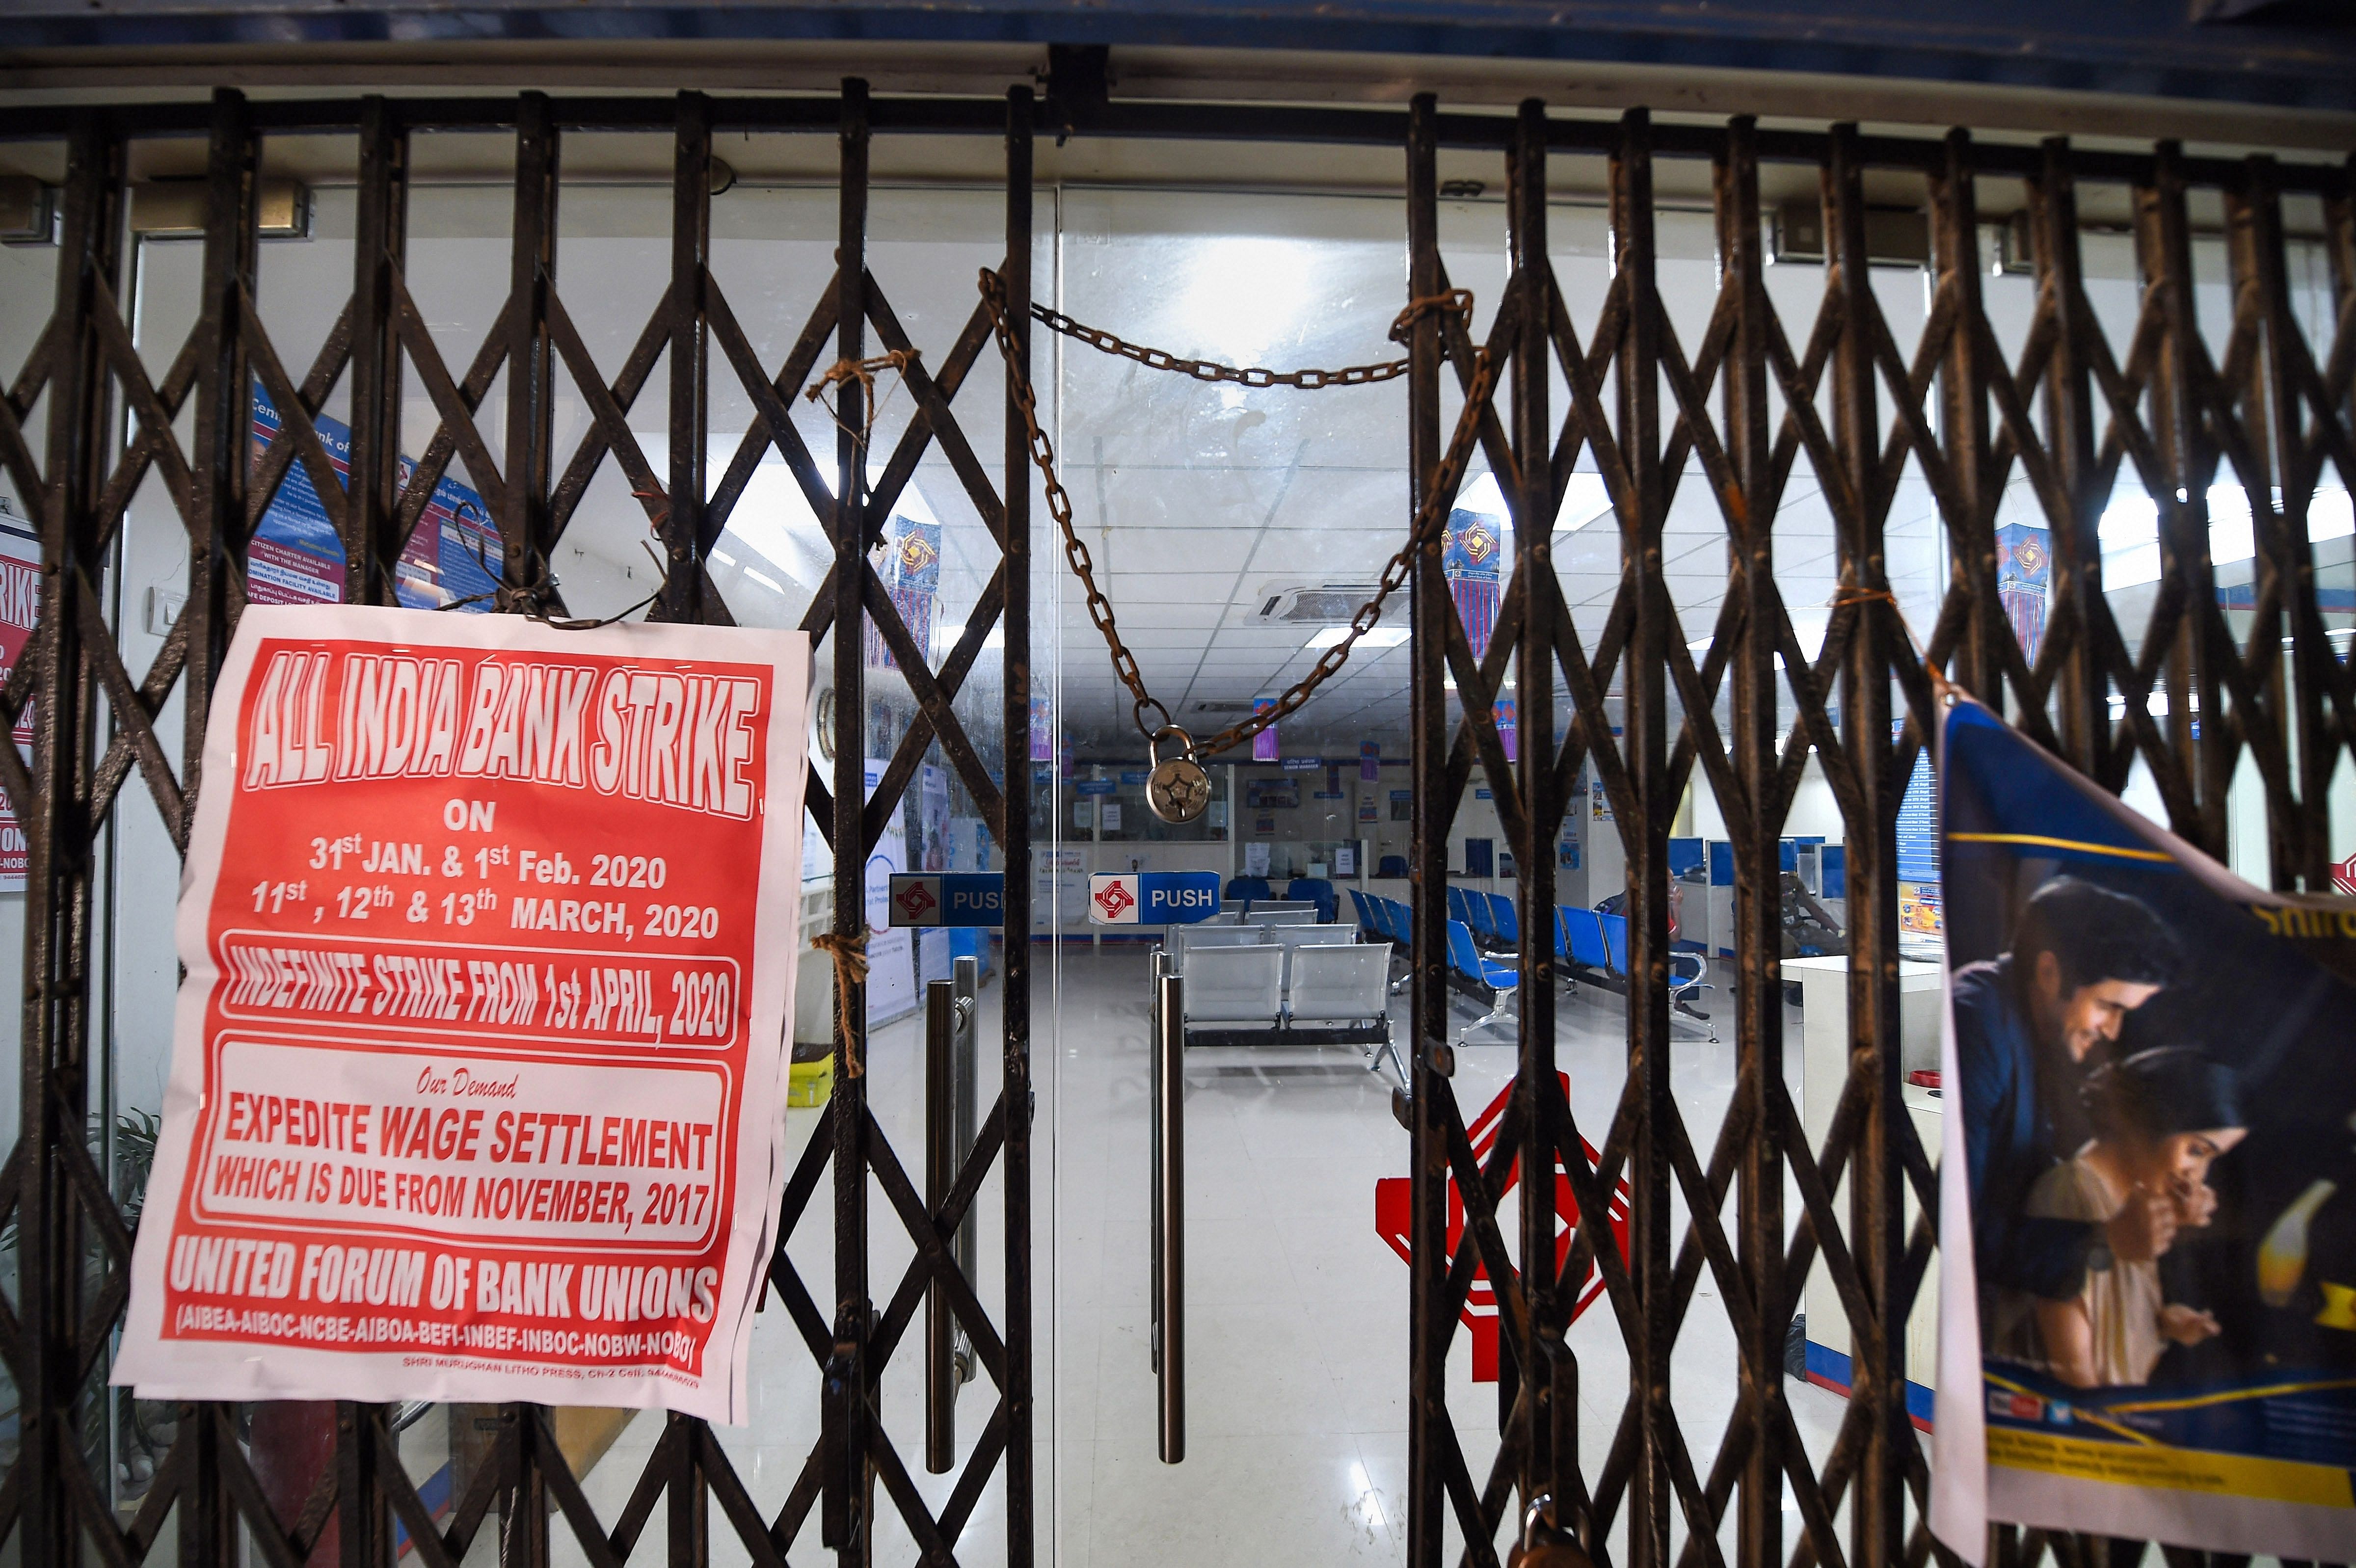 A branch of a nationalised bank remains closed during the bank unions' two-day strike demanding for settlement of their wages, in Chennai, Friday, Jan. 31, 2020. (Credit: PTI Photo)